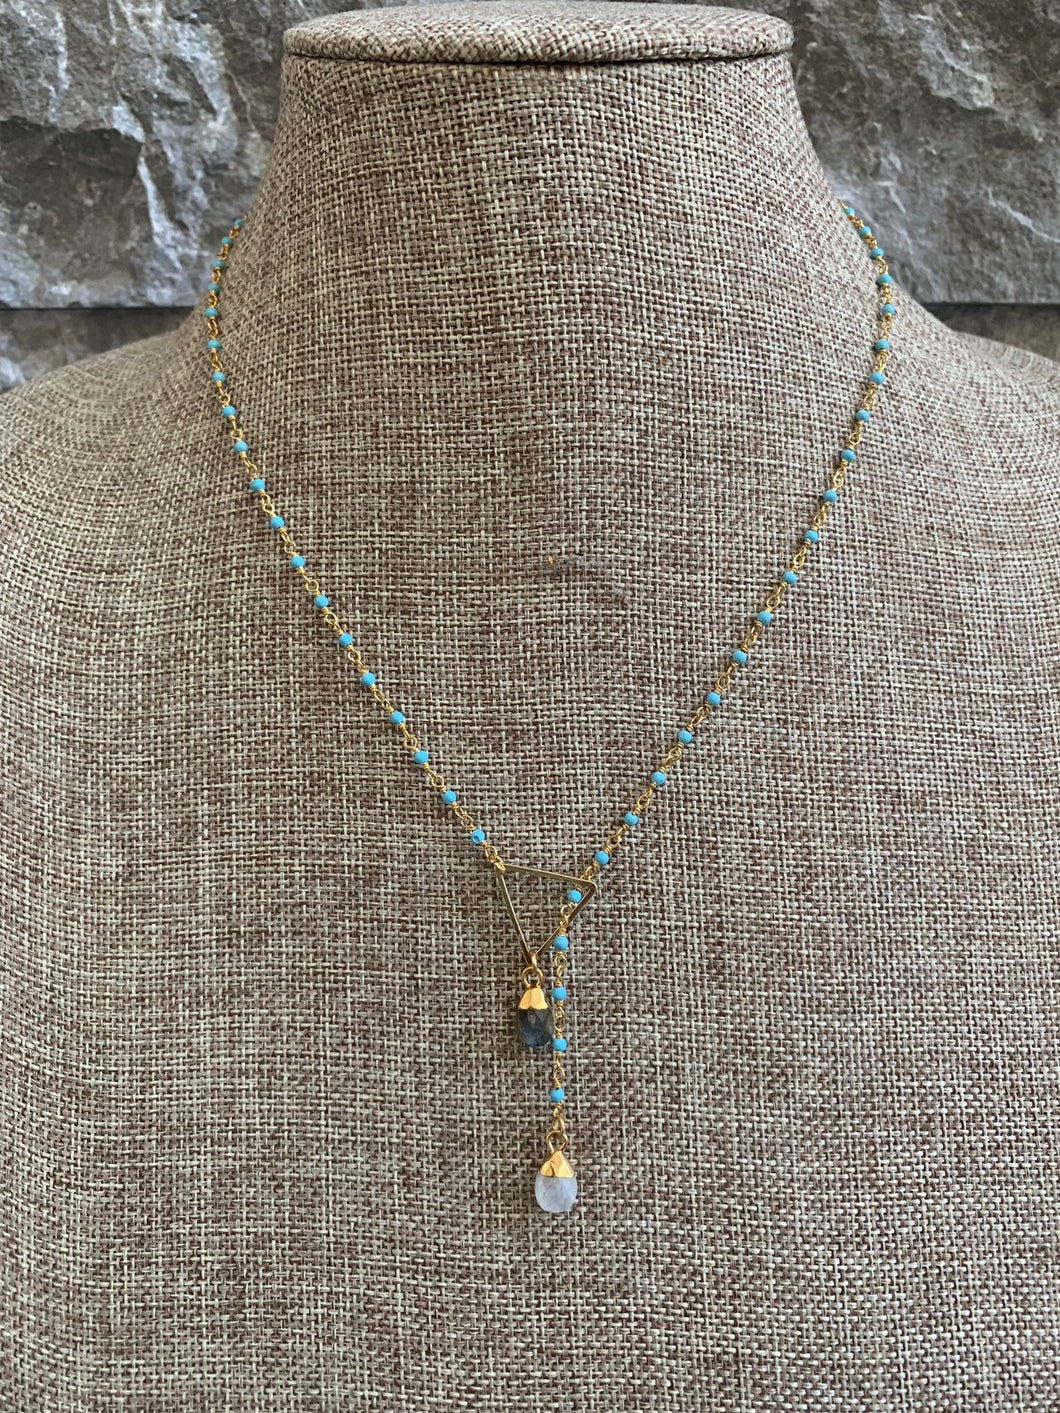 Dainty turquoise triangle lariat with moonstone and labraodite hangs